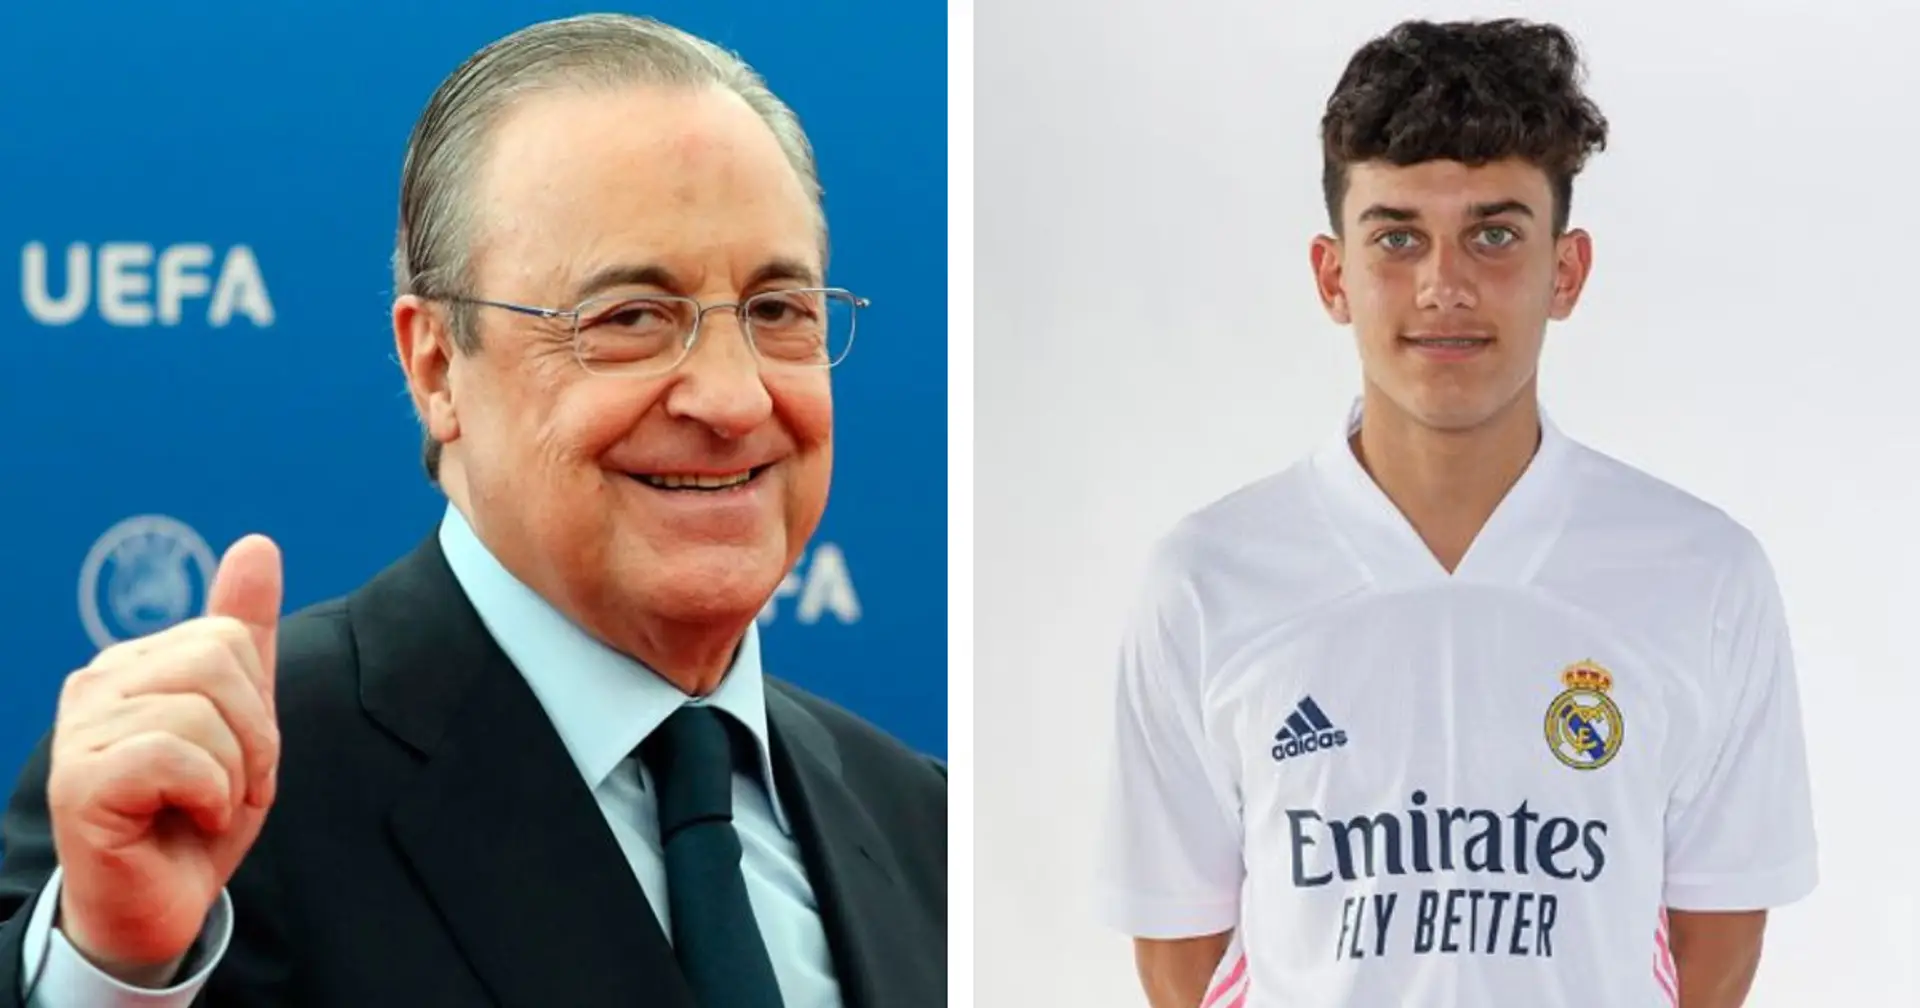 Big president and even bigger heart Florentino Perez takes care of son of late Jose Antonio Reyes until he turns 18